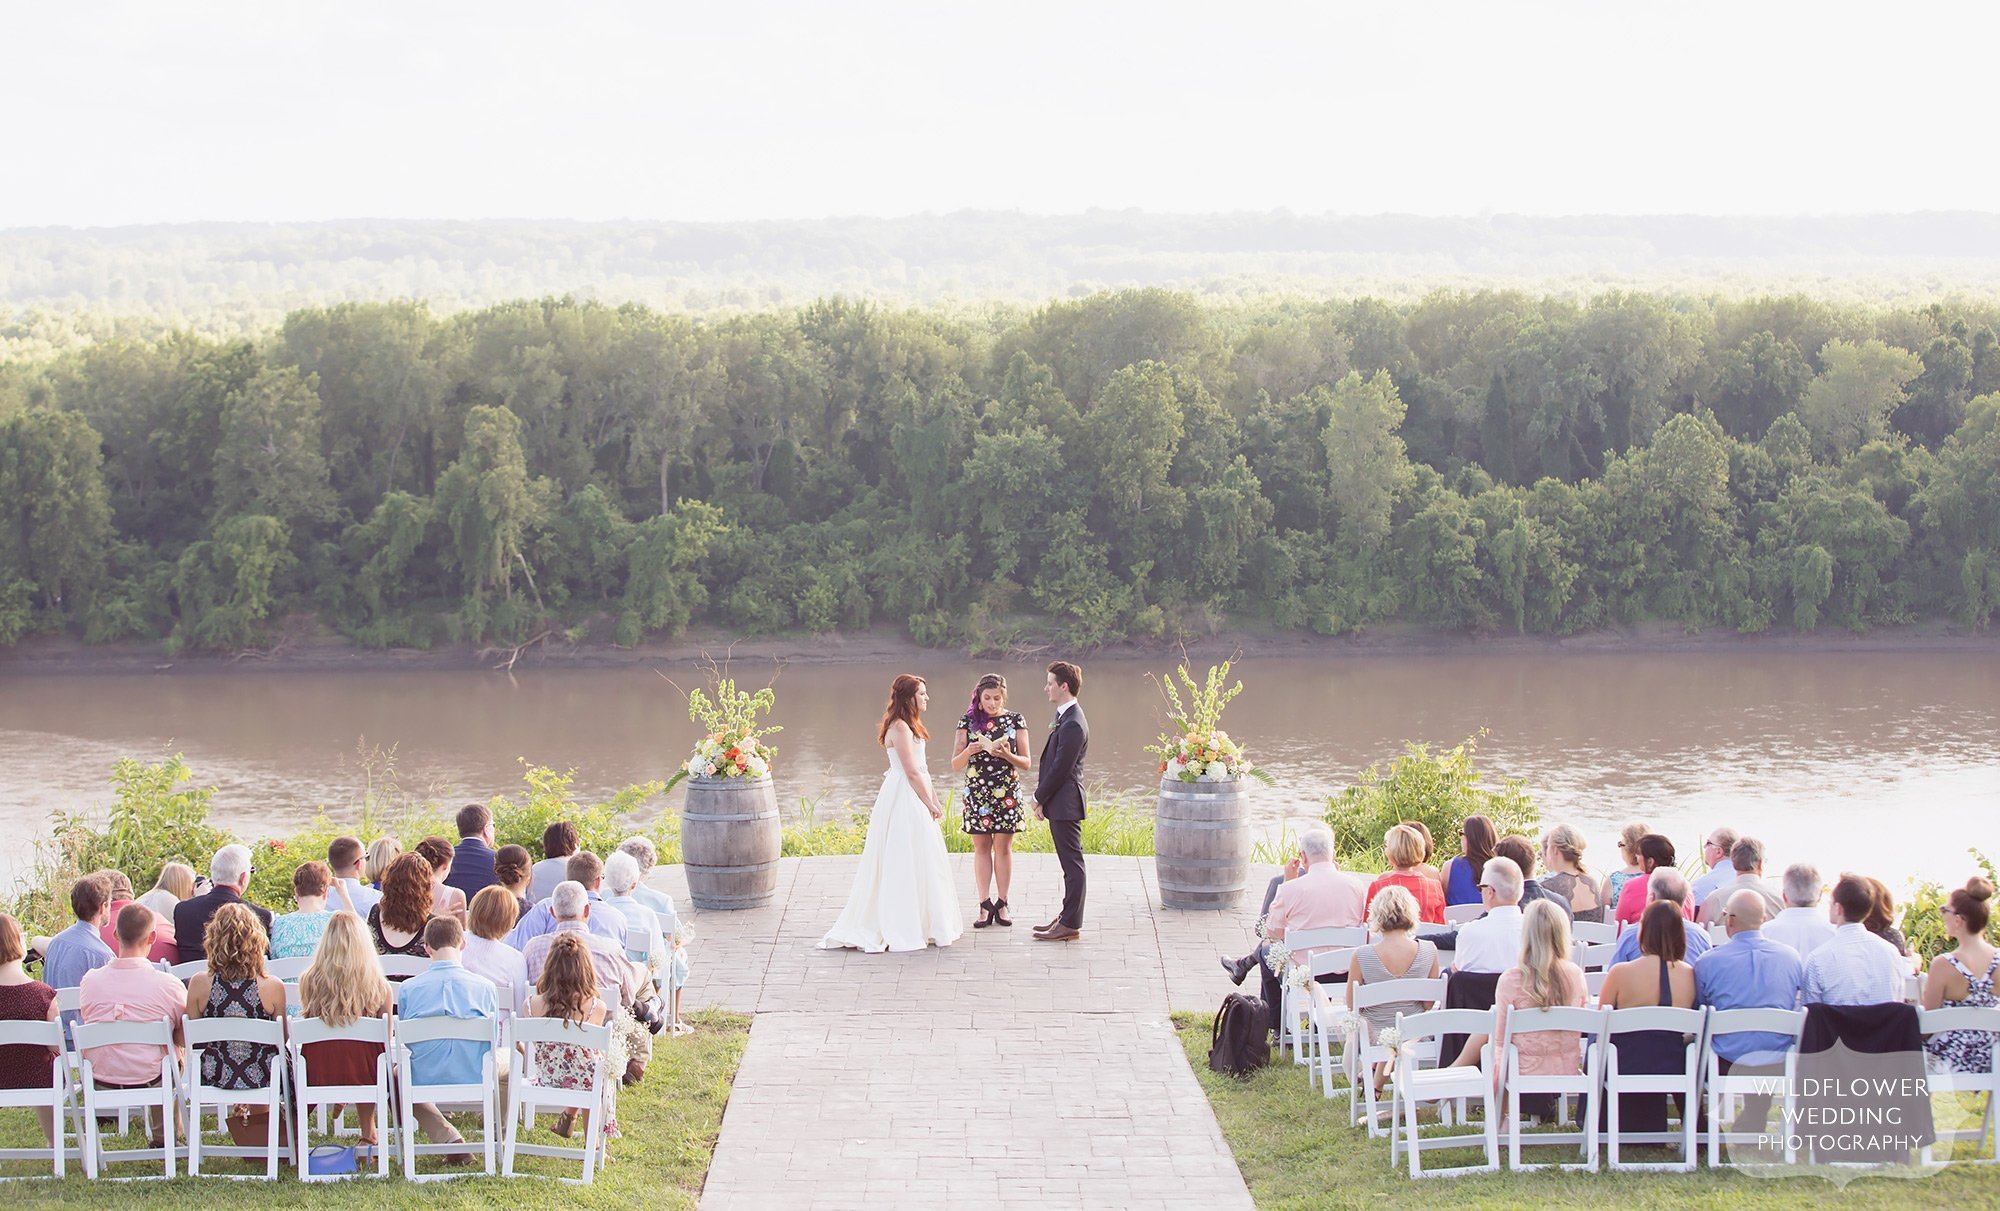 Outdoor summer wedding ceremony on the blufftop at Les Bourgeois Winery in Rocheport, MO.